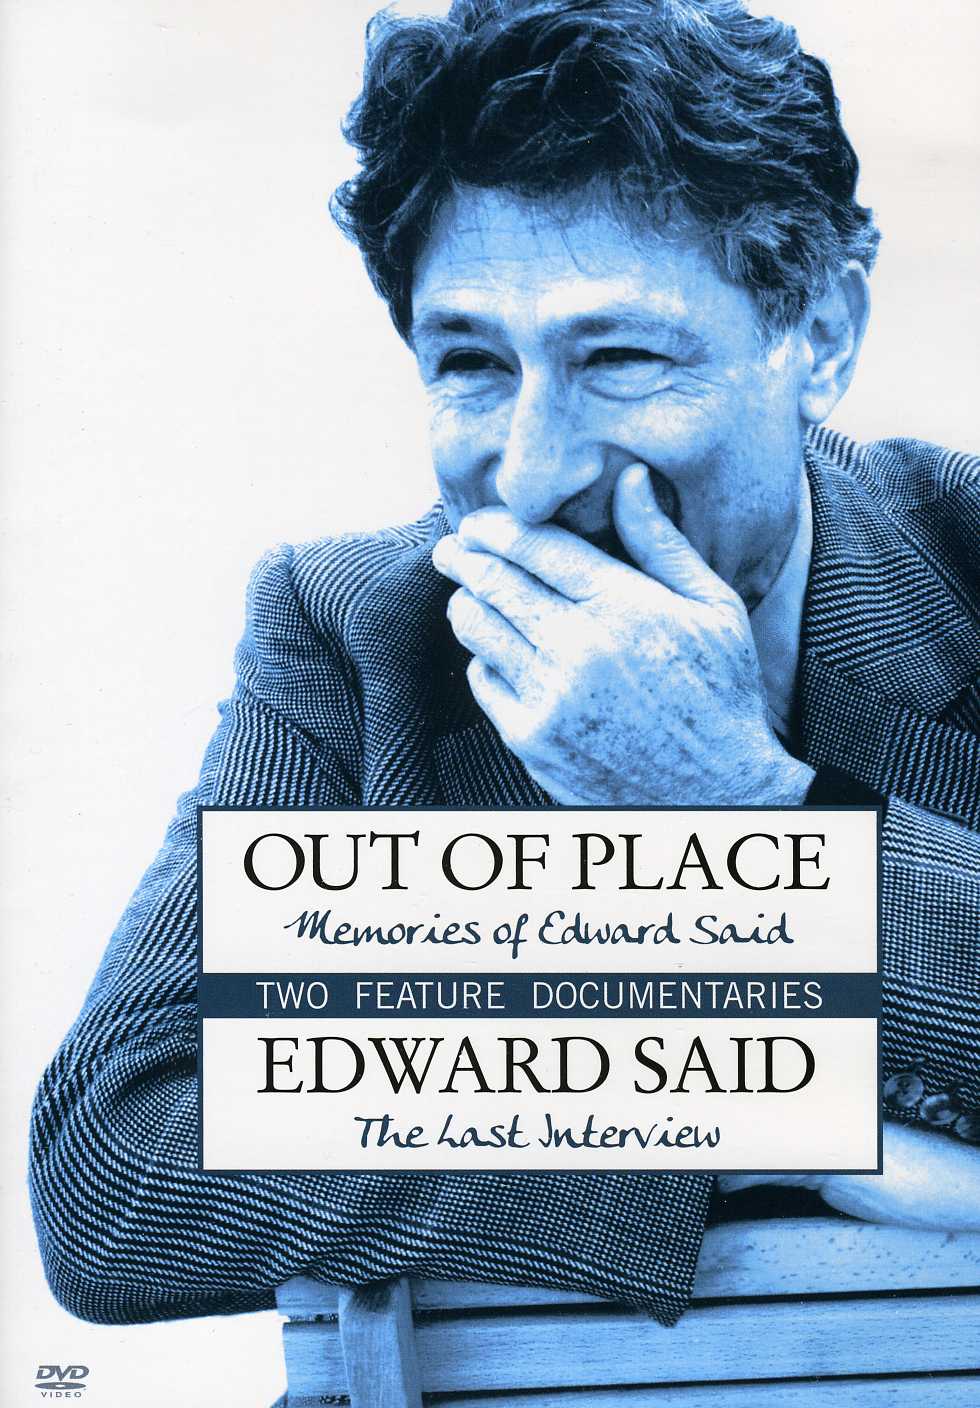 OUT OF PLACE: MEMORIES OF EDWARD SAID & EDWARD